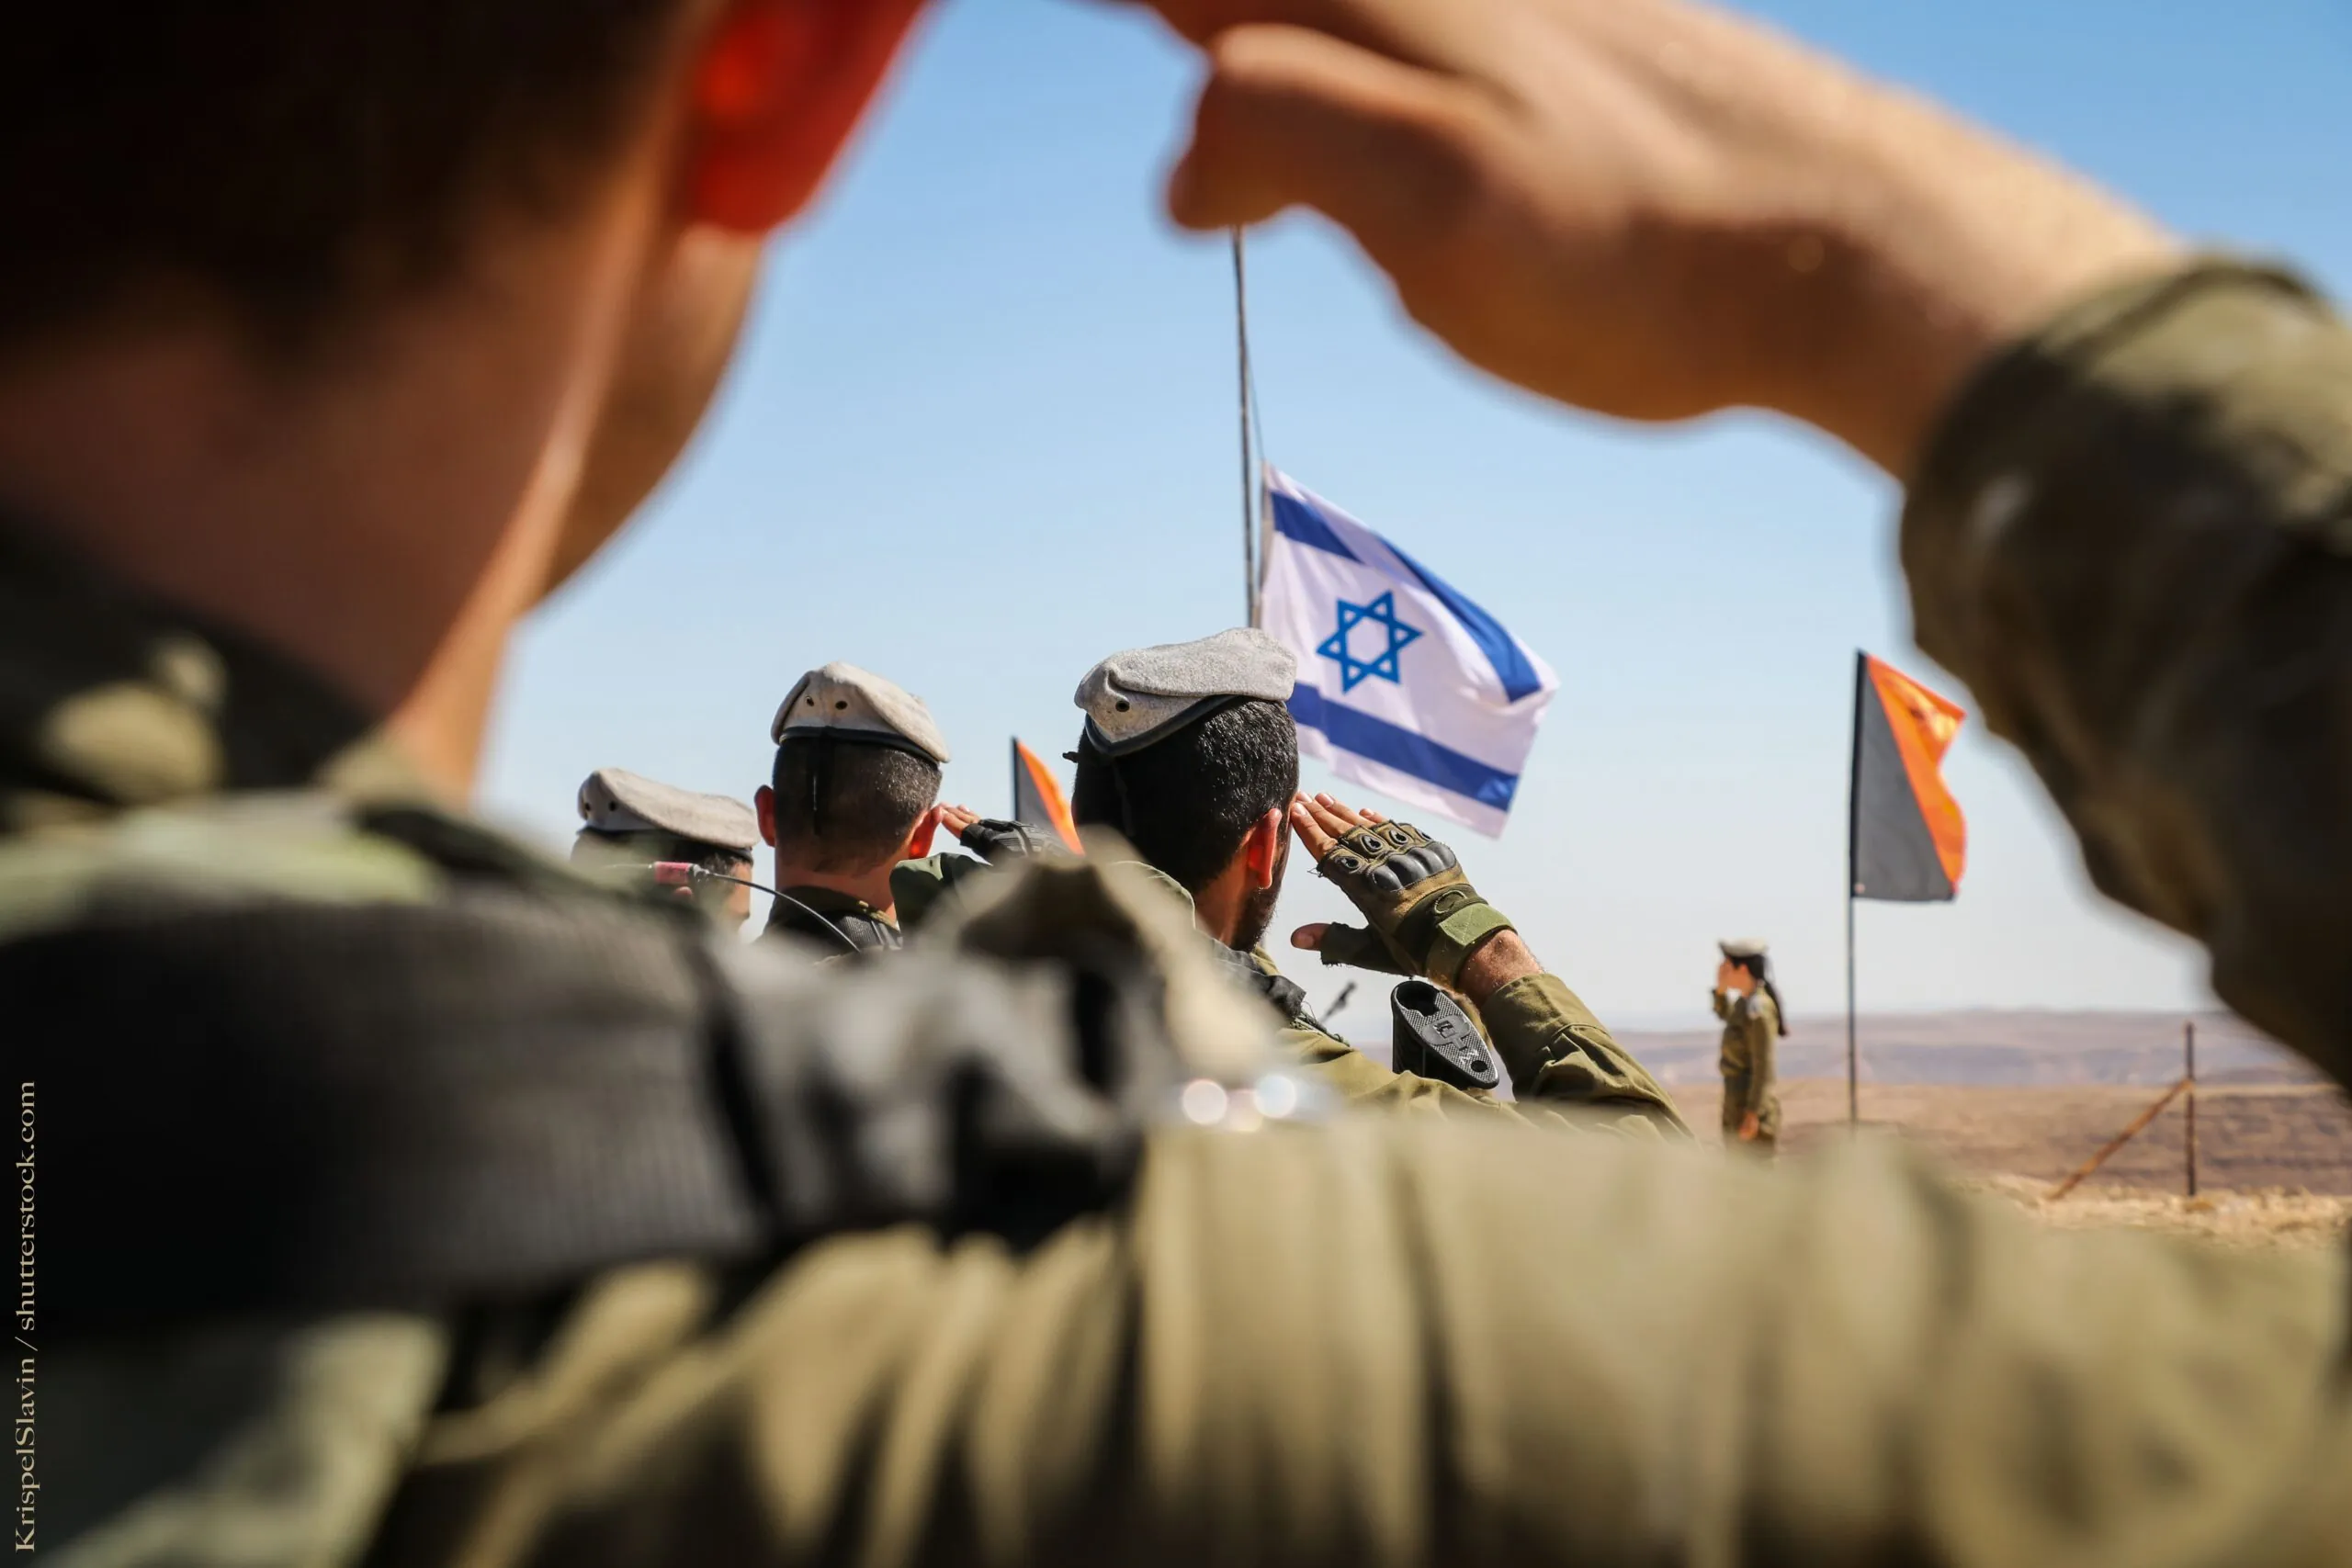 Israeli soldiers in a military ceremony.